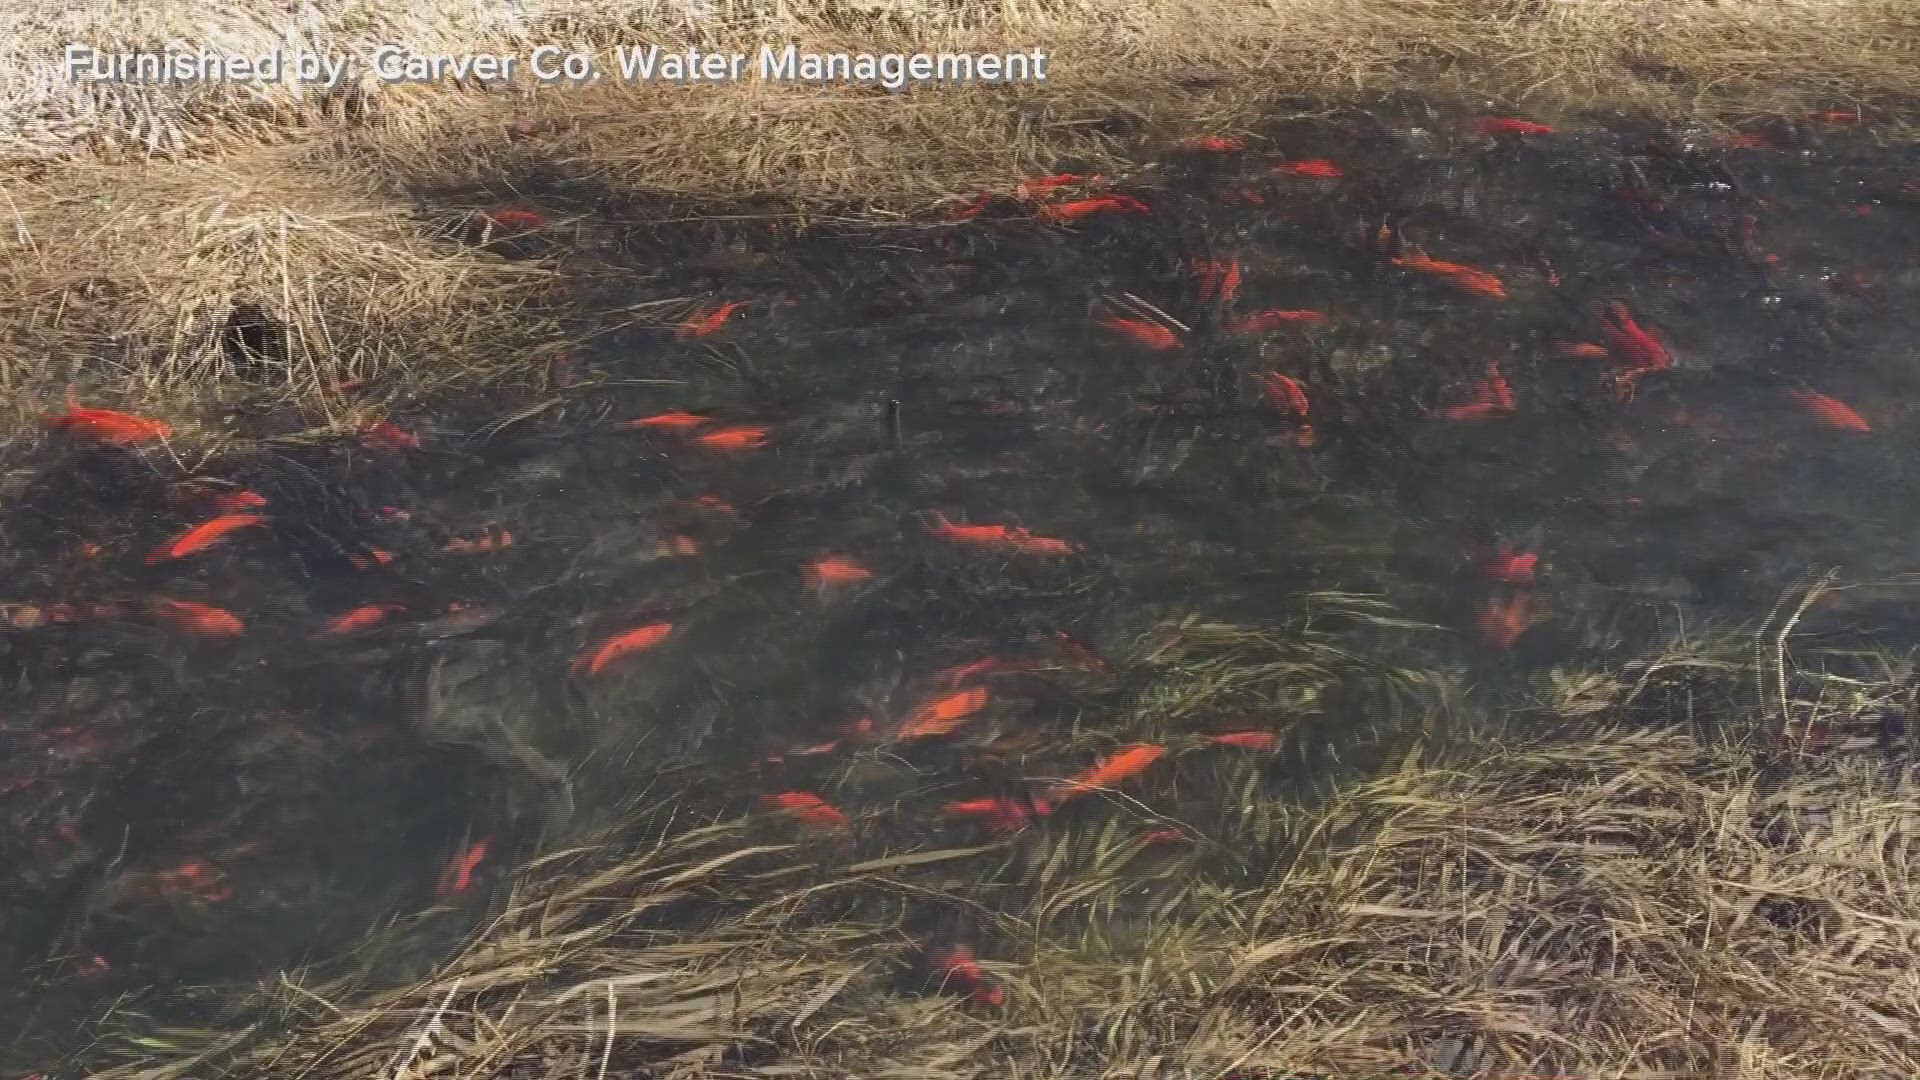 Thousands of invasive goldfish have been found in Chaska’s chain of lakes.  County leaders believe they were dumped here, which is illegal.